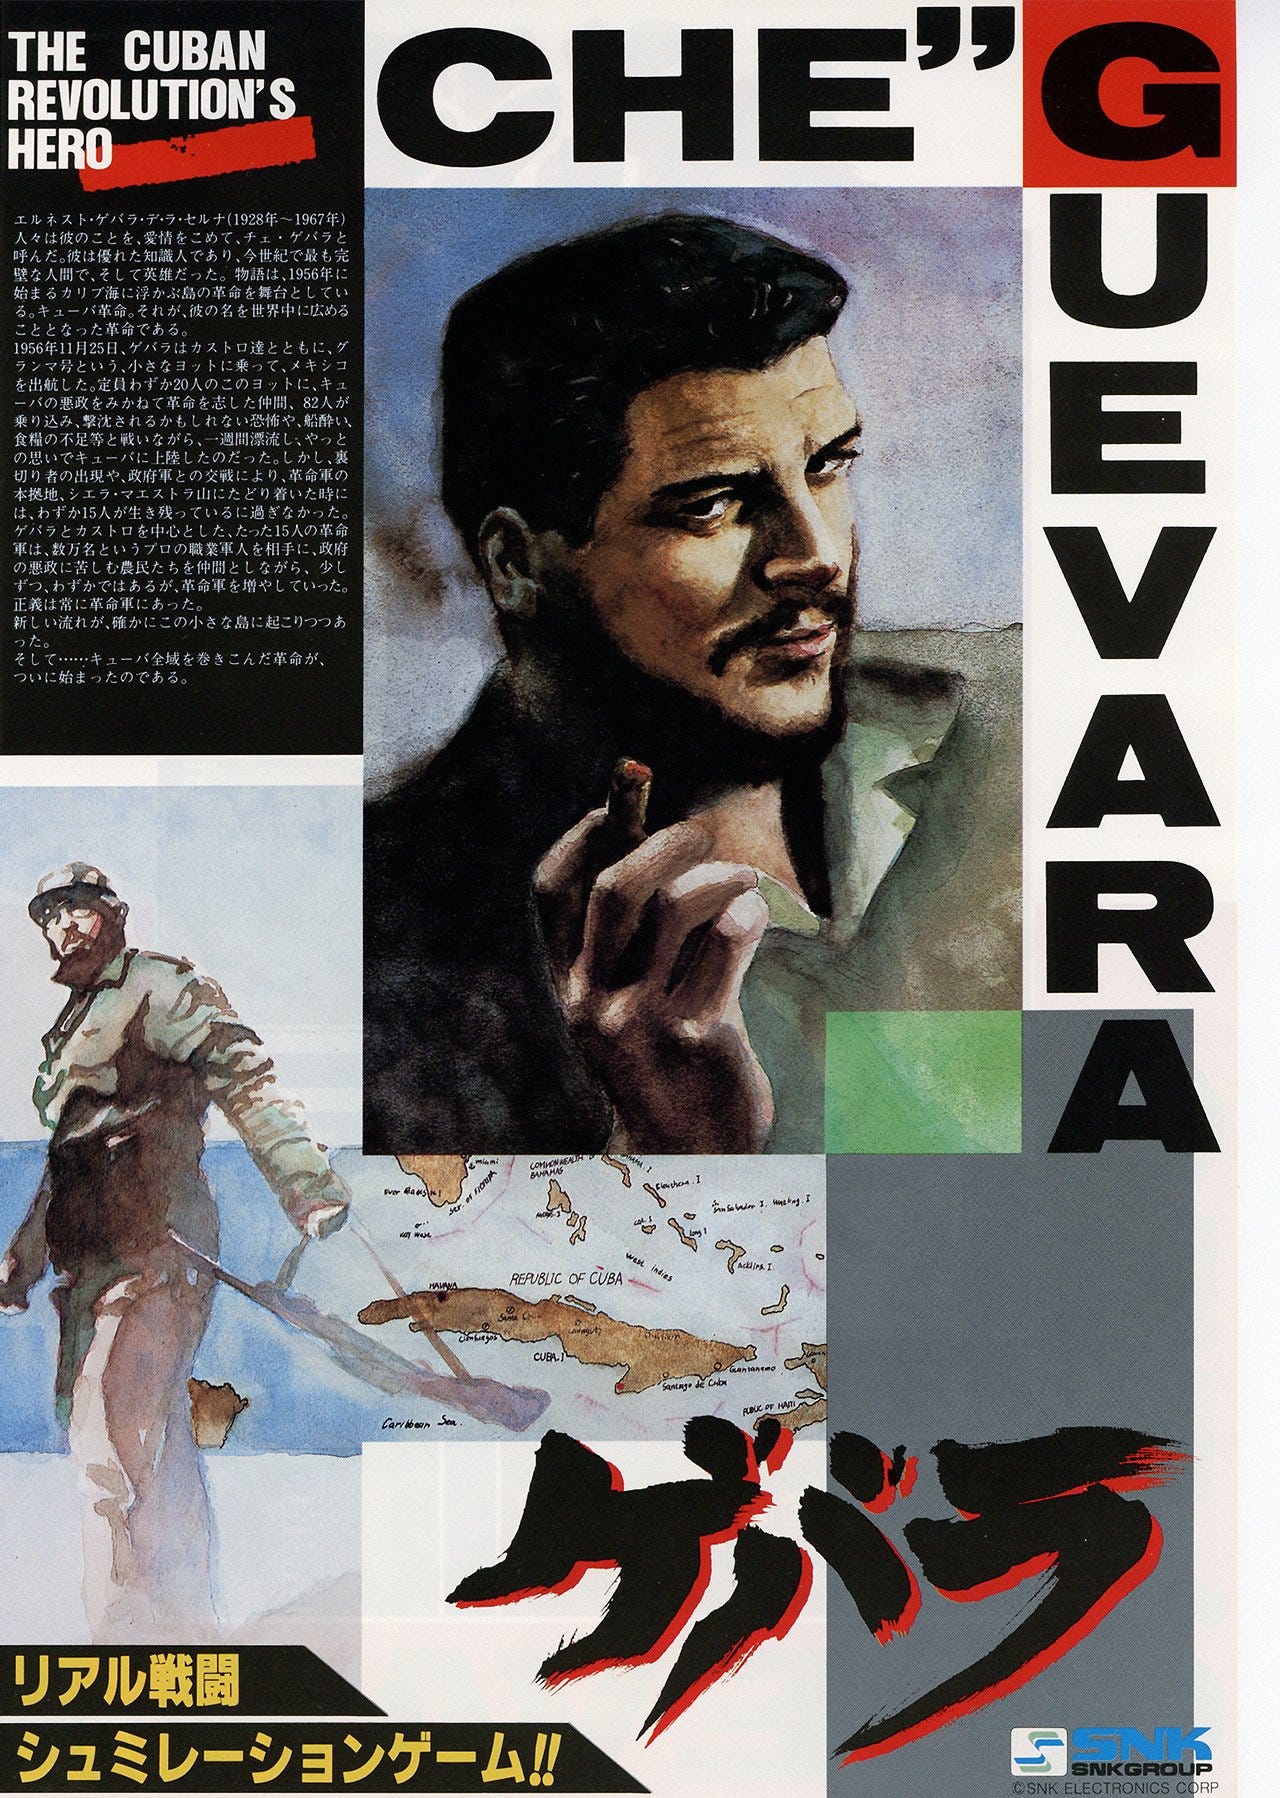 A flier from the Japanese arcade version of Guevera, with "The Cuban Revolution's Hero" and Guevara's name in English